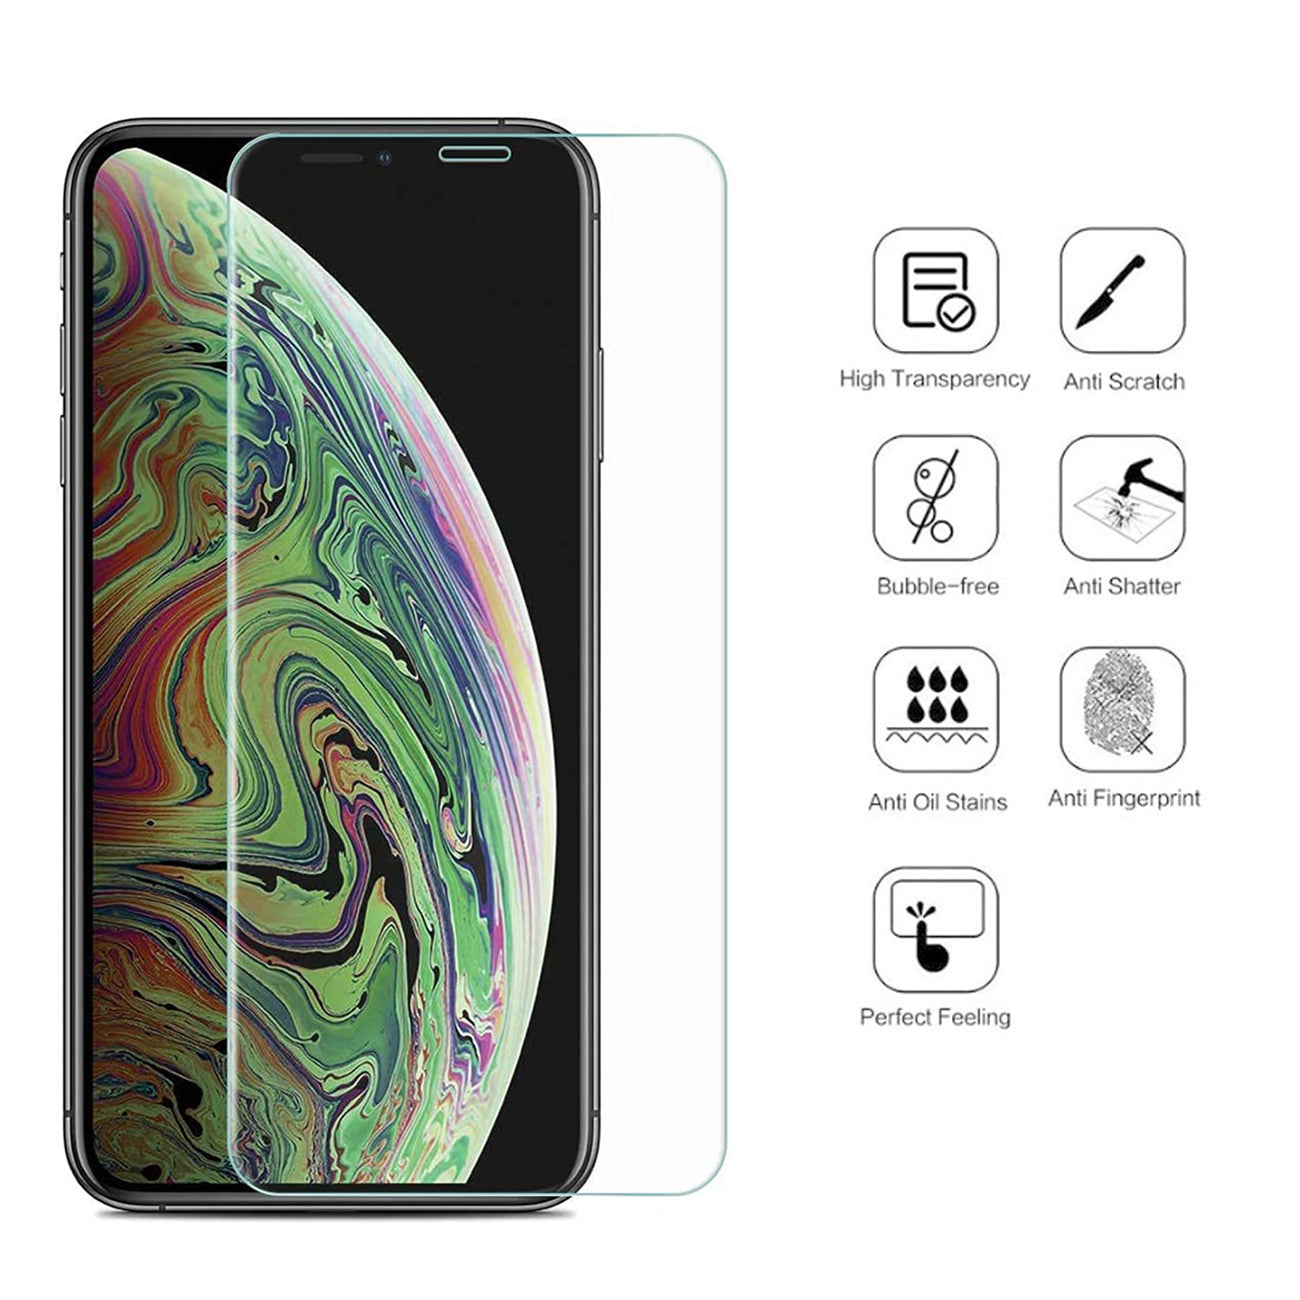 Premium (10 Pack) 0.33mm 2.5D Tempered Glass for iPhone X / iPhone XS / iPhone 11 Pro